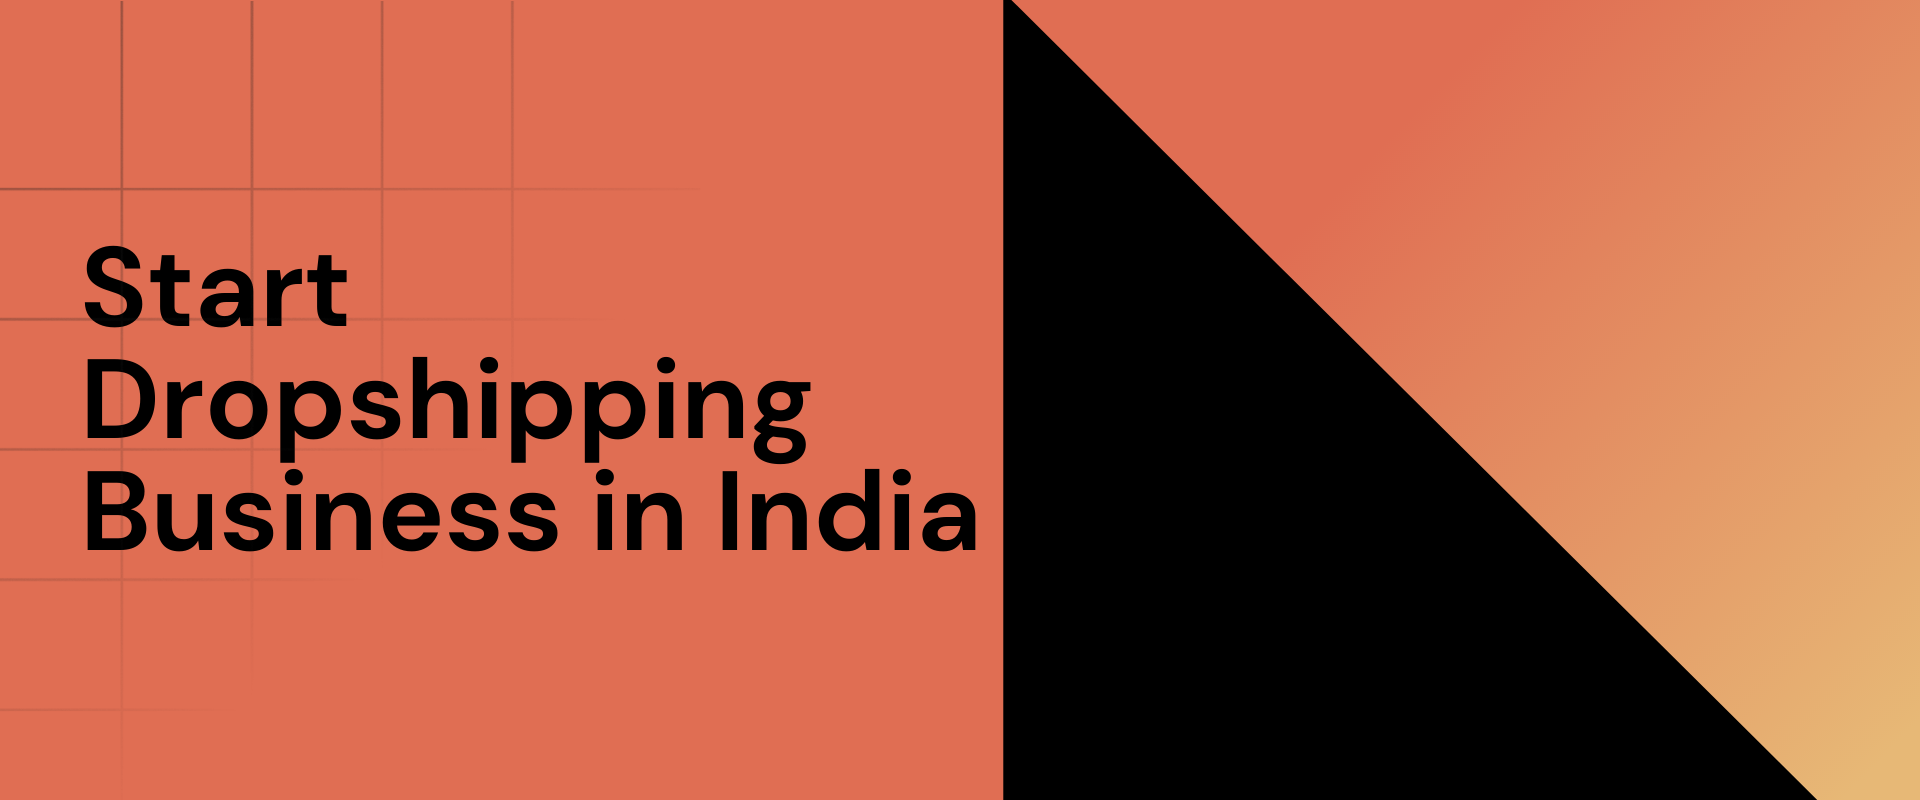 How To Start Dropshipping Business in India in 3 Easy Steps